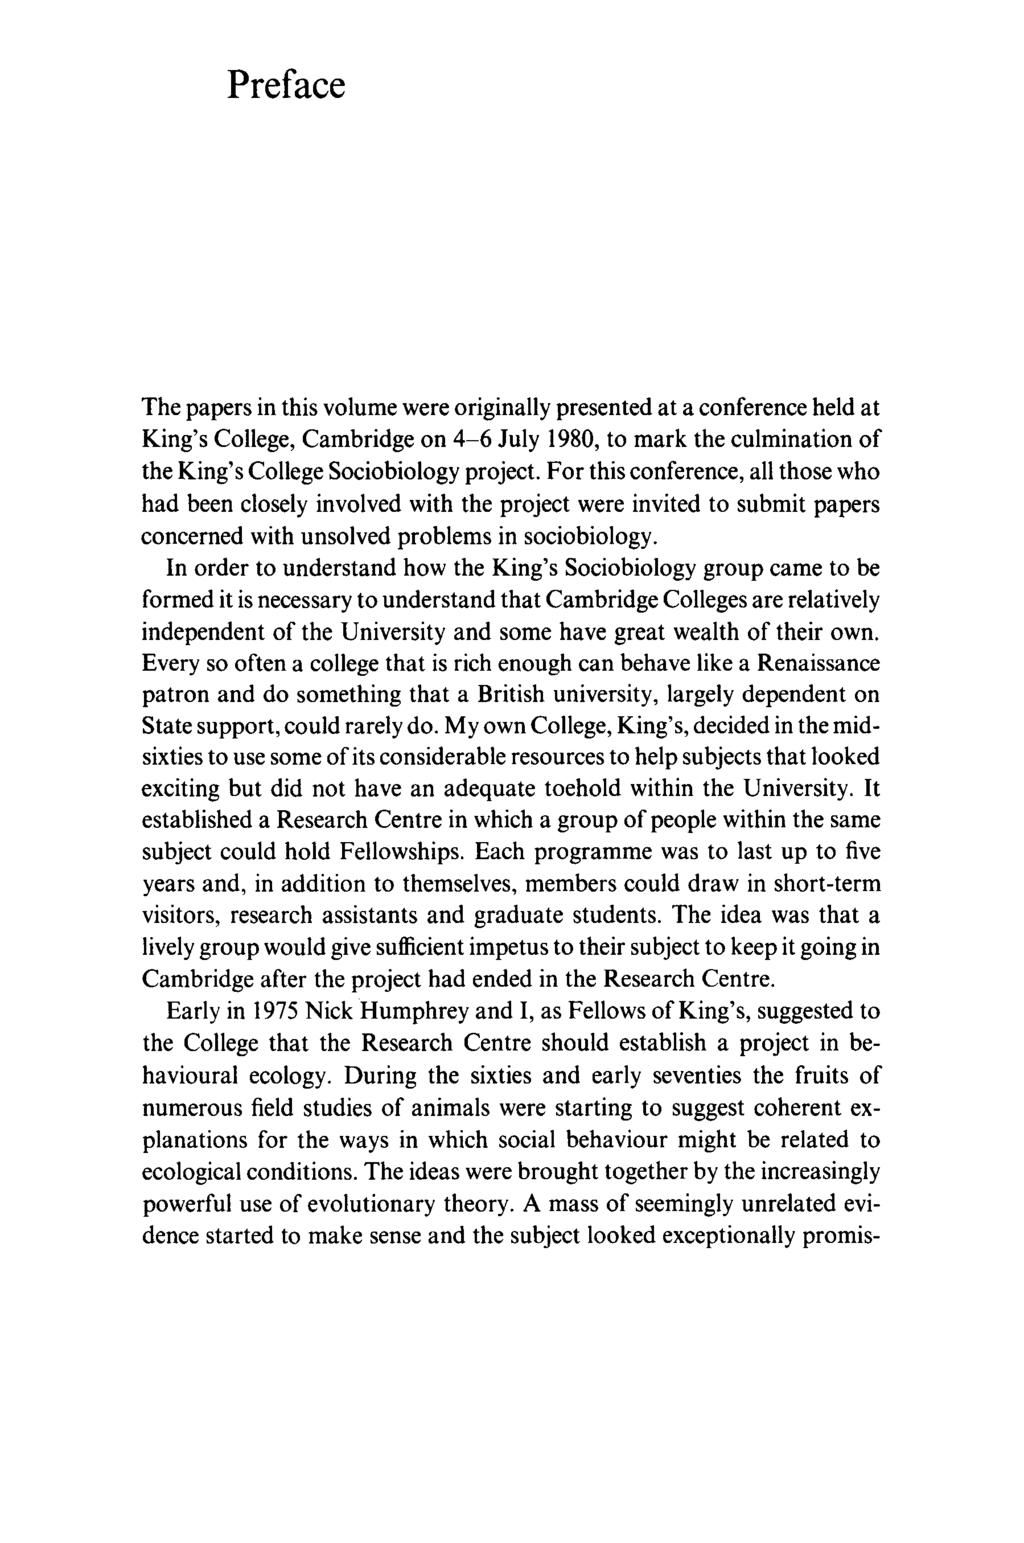 Preface The papers in this volume were originally presented at a conference held at King's College, Cambridge on 4-6 July 1980, to mark the culmination of the King's College Sociobiology project.